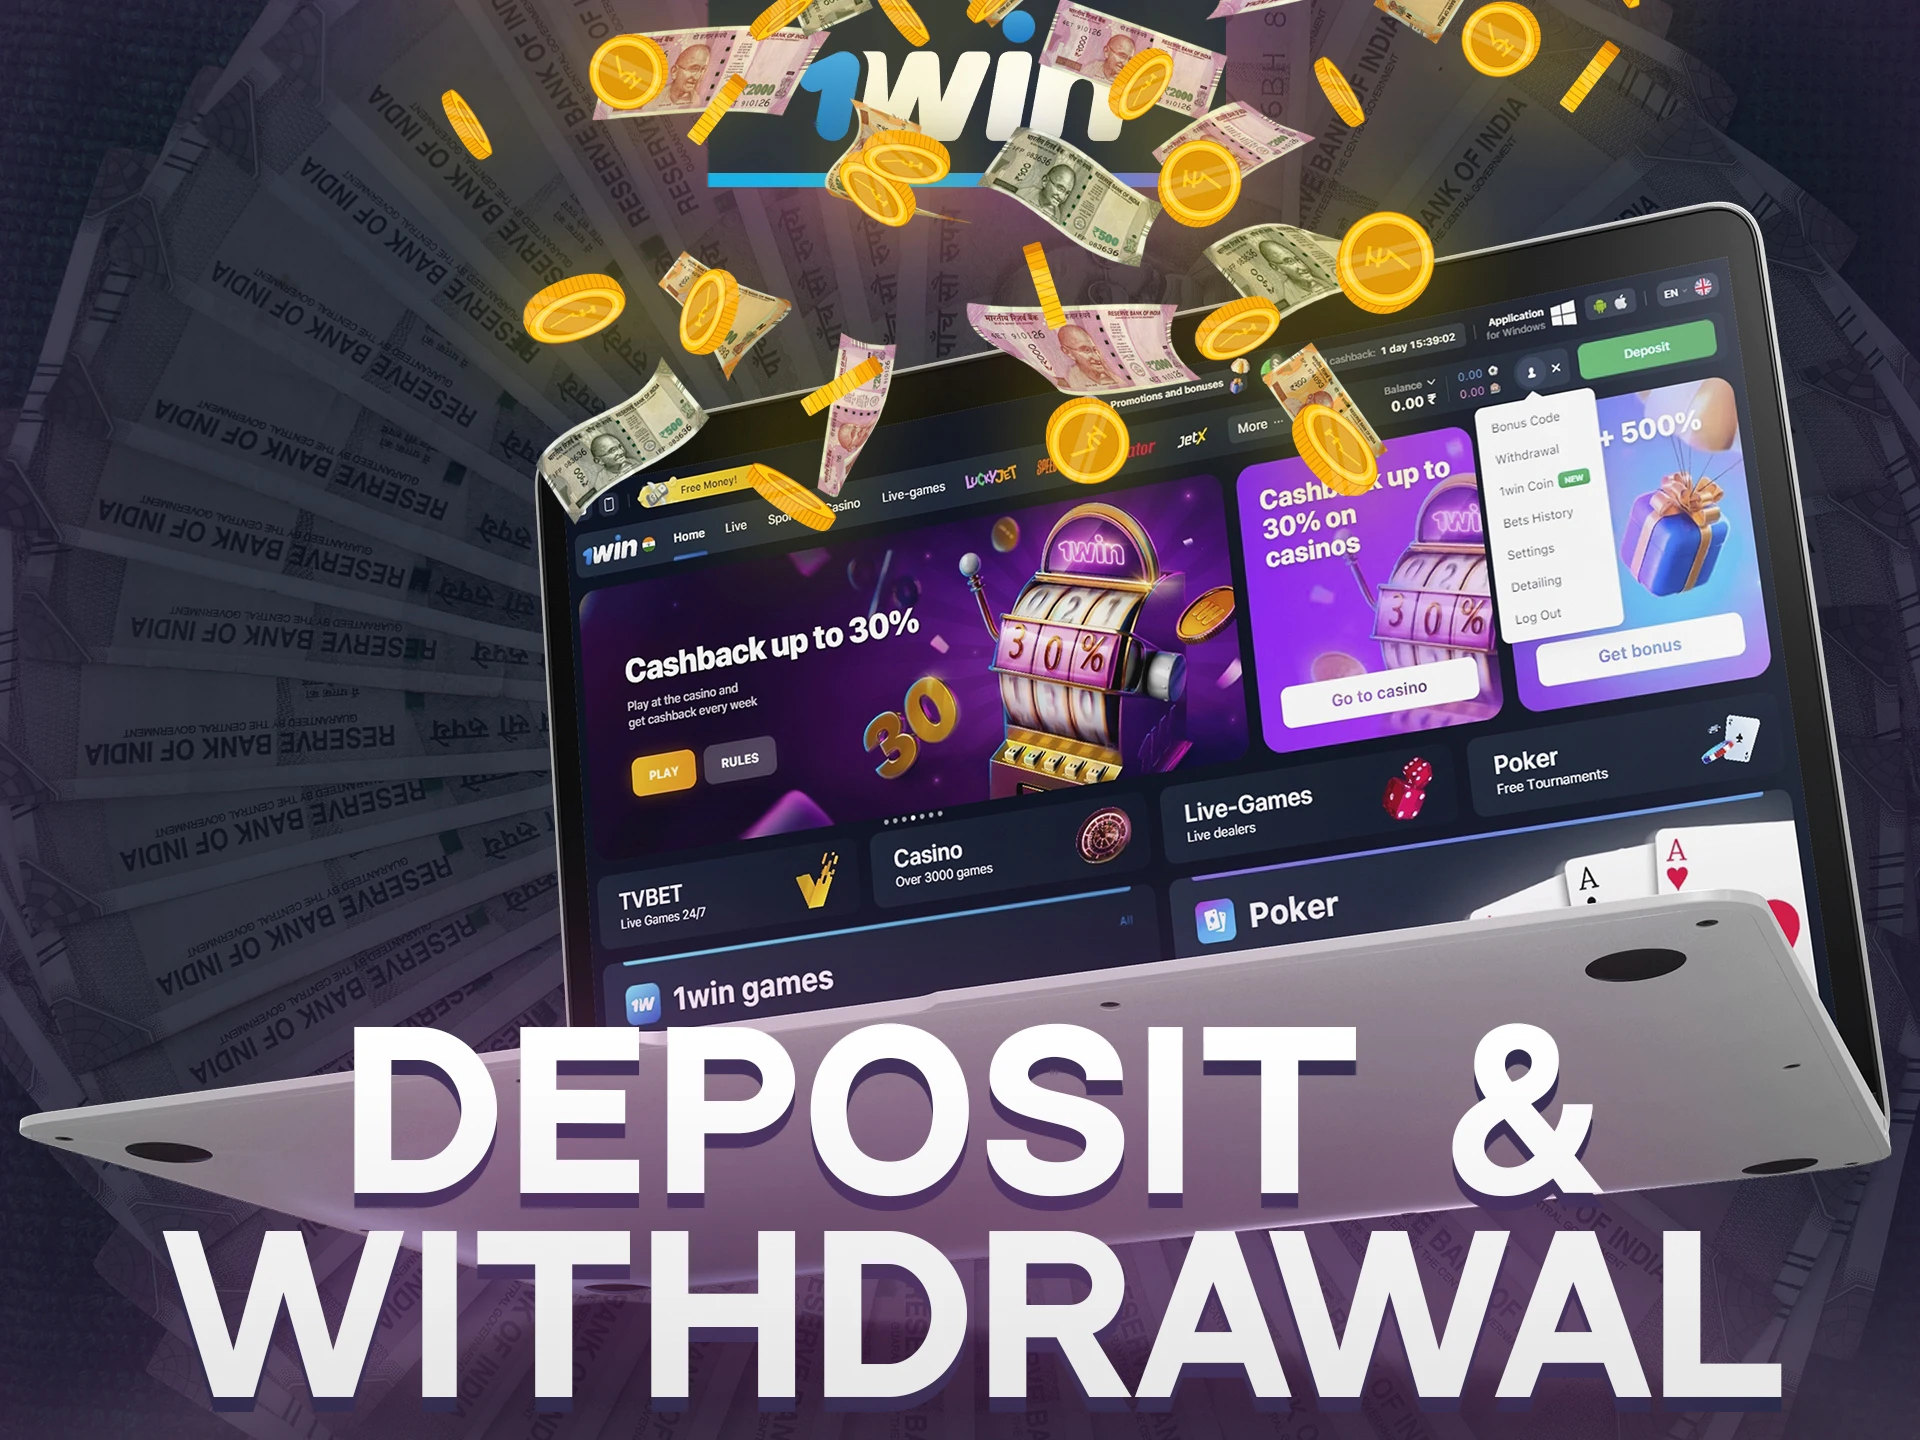 Before starting to play Aviator, you need to make a deposit to your 1win account.